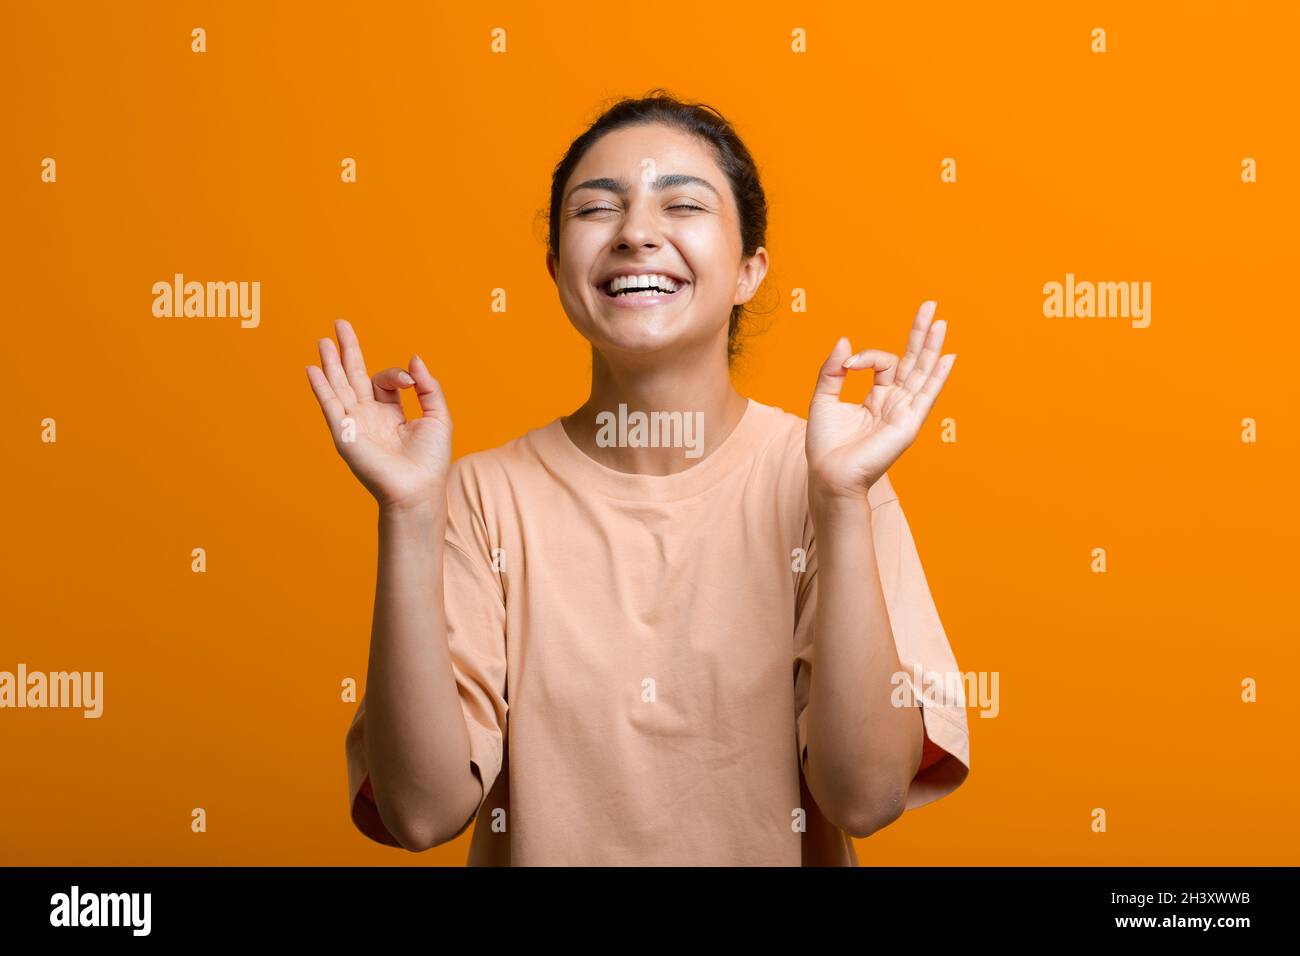 Portrait of young adult indian woman in sari meditating zen like with ok sign mudra gesture Stock Photo